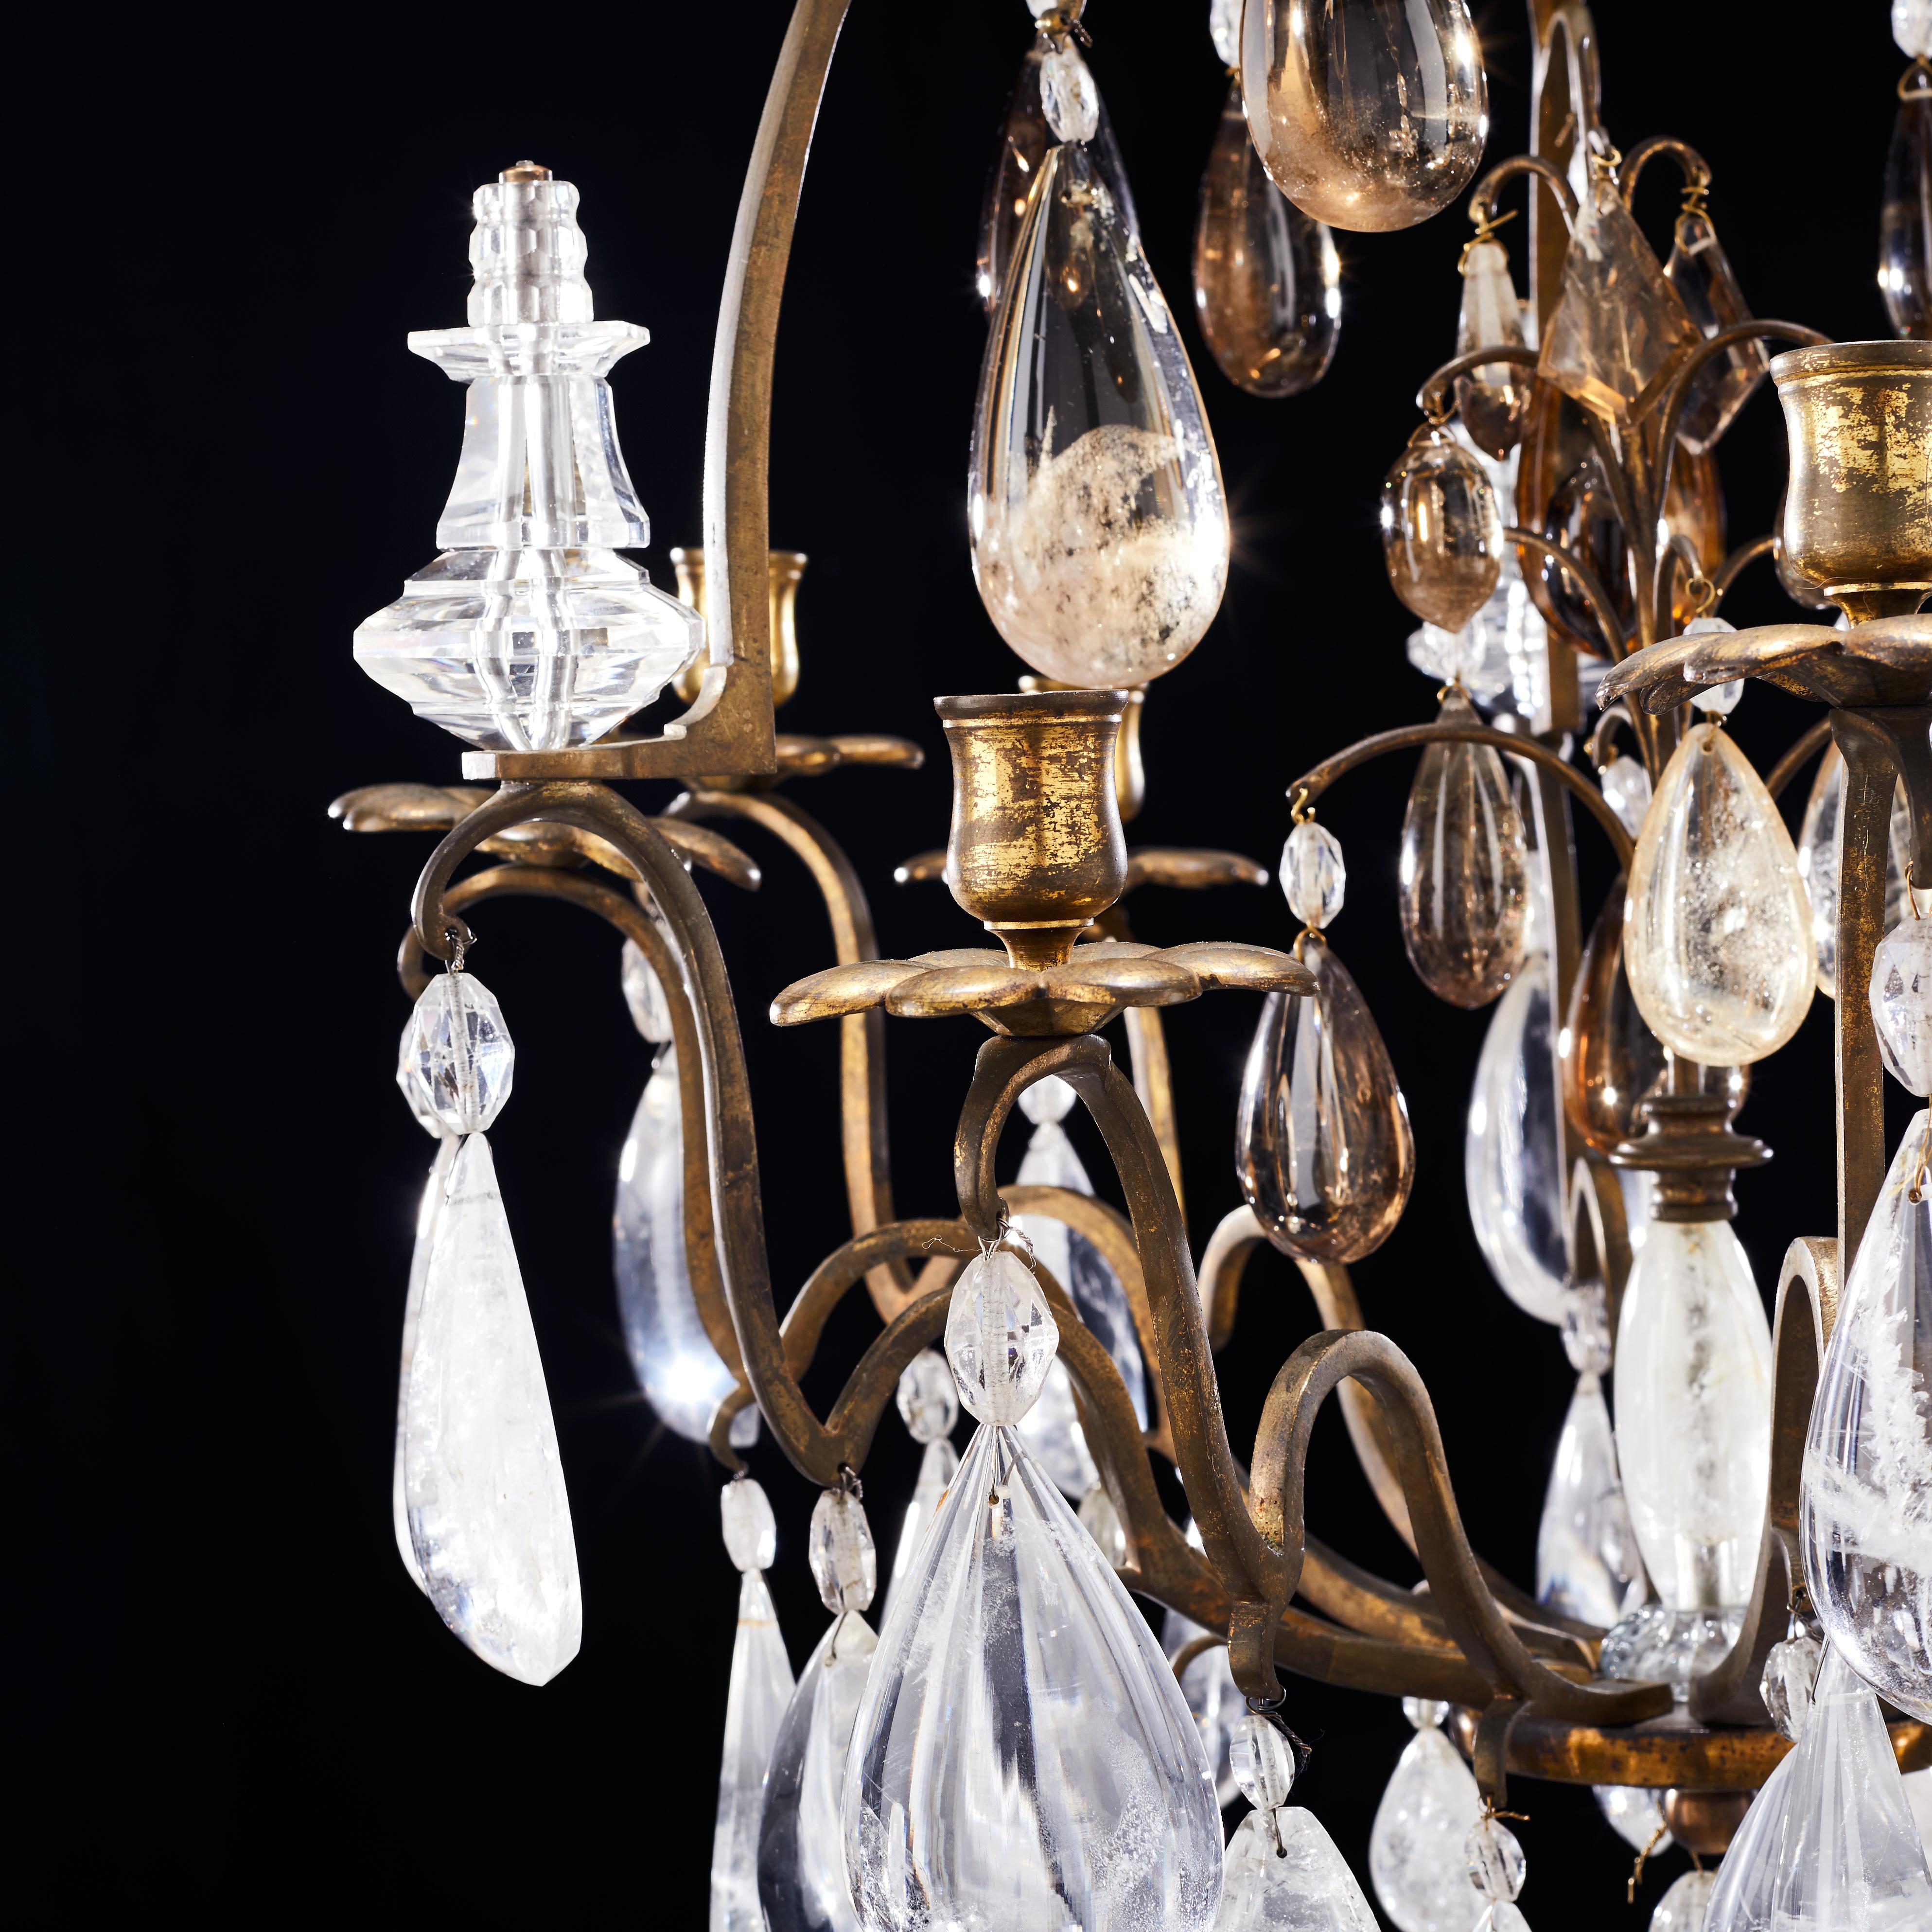 A French gilt bronze rock crystal Louis XV style nine-light chandelier, from the second half of the 19th century. Gilt bronze cage form framework. Some amber-colored rock crystals. 
A very nice and charming chandelier of nice proportions. The